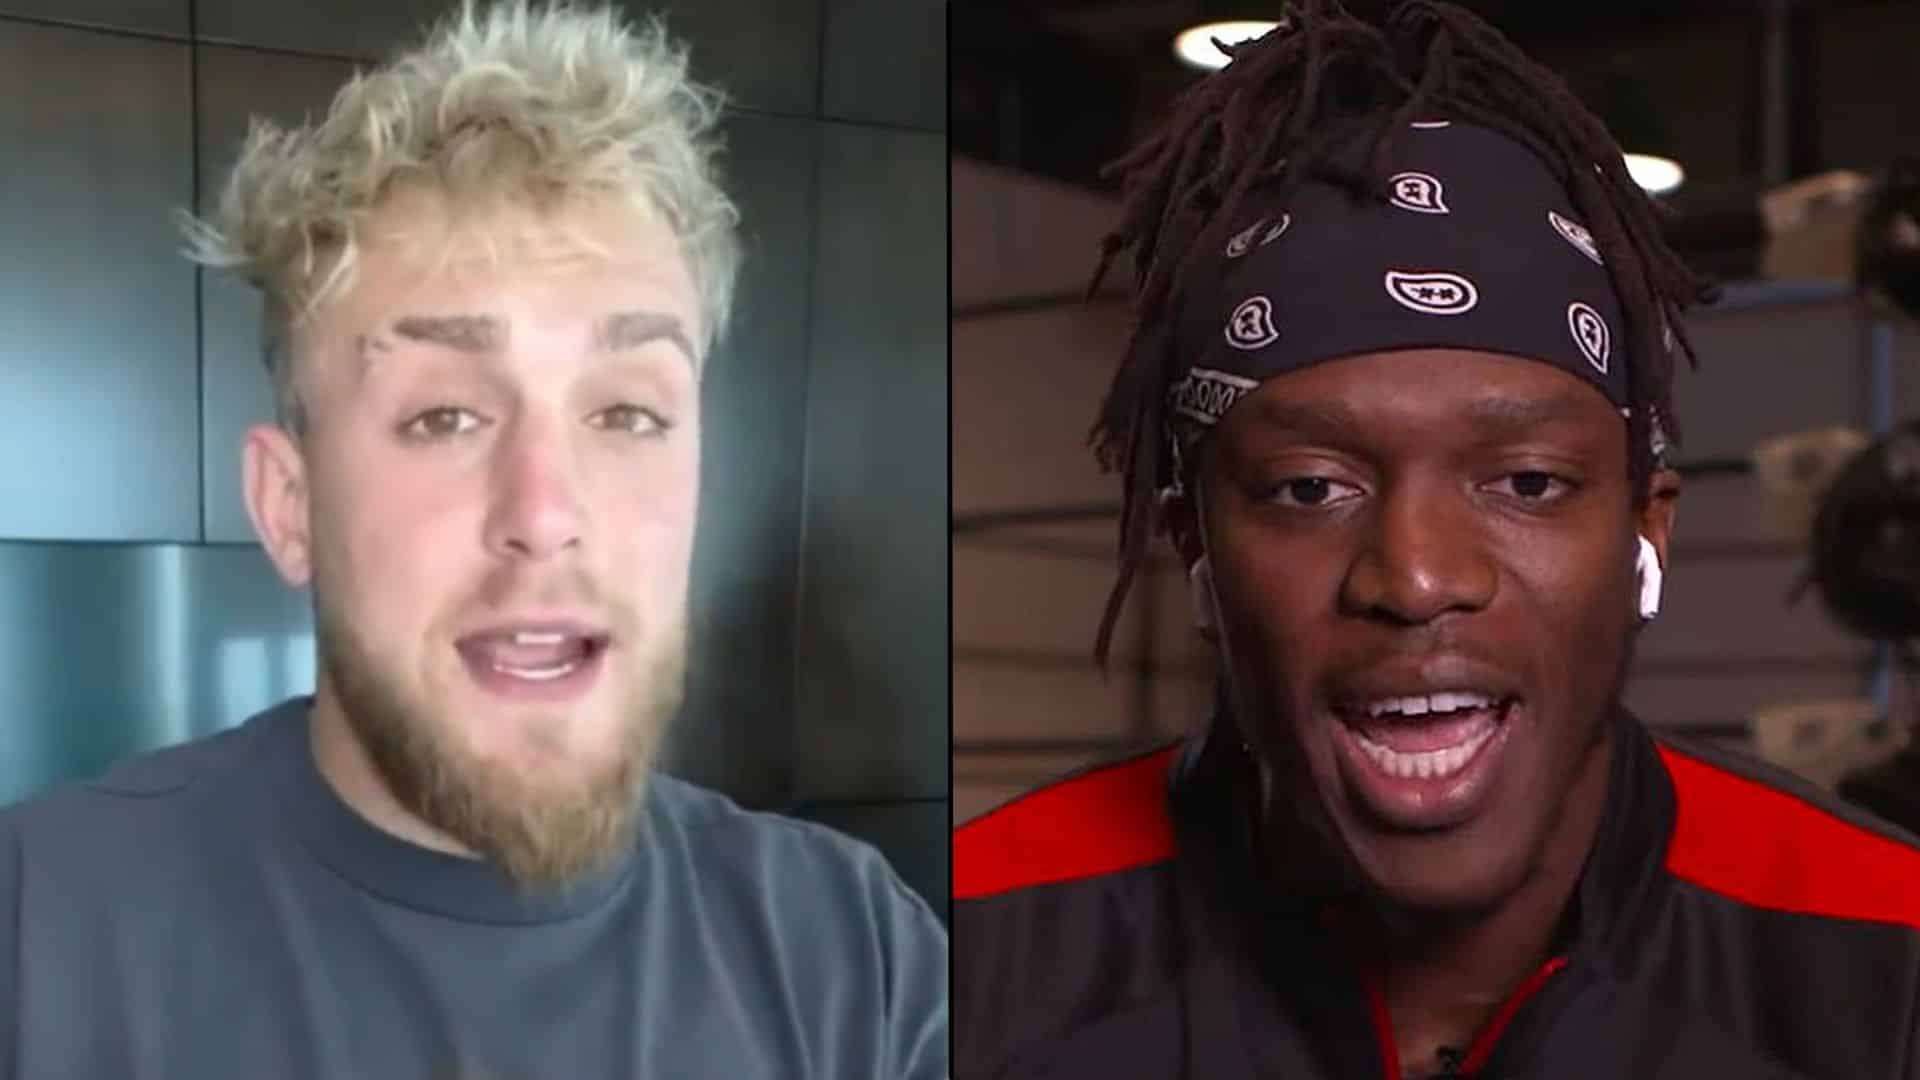 Jake Paul and KSI side-by-side talking to cameras